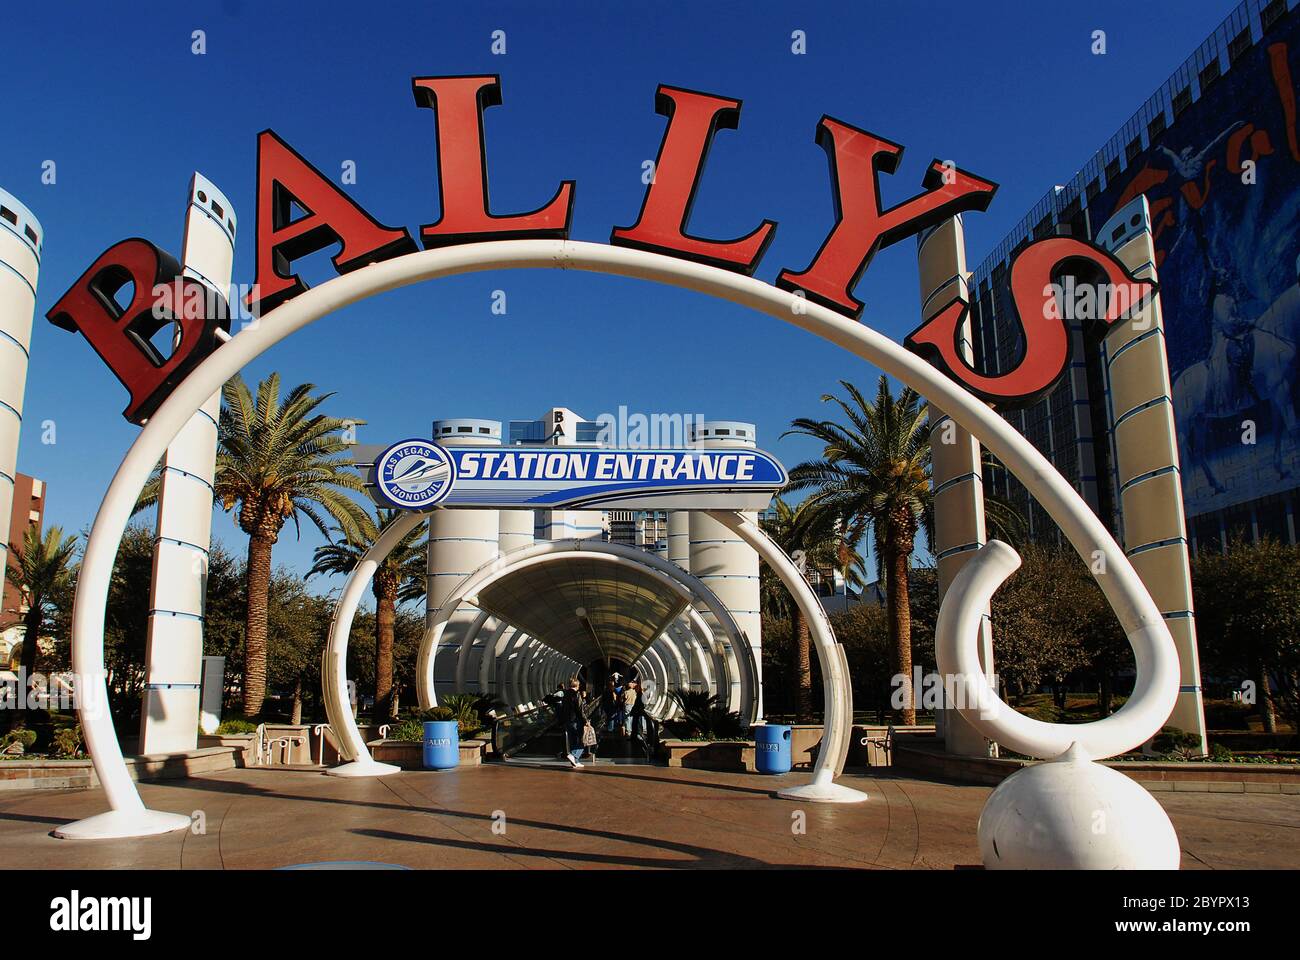 Entrance bally's las vegas hi-res stock photography and images - Alamy